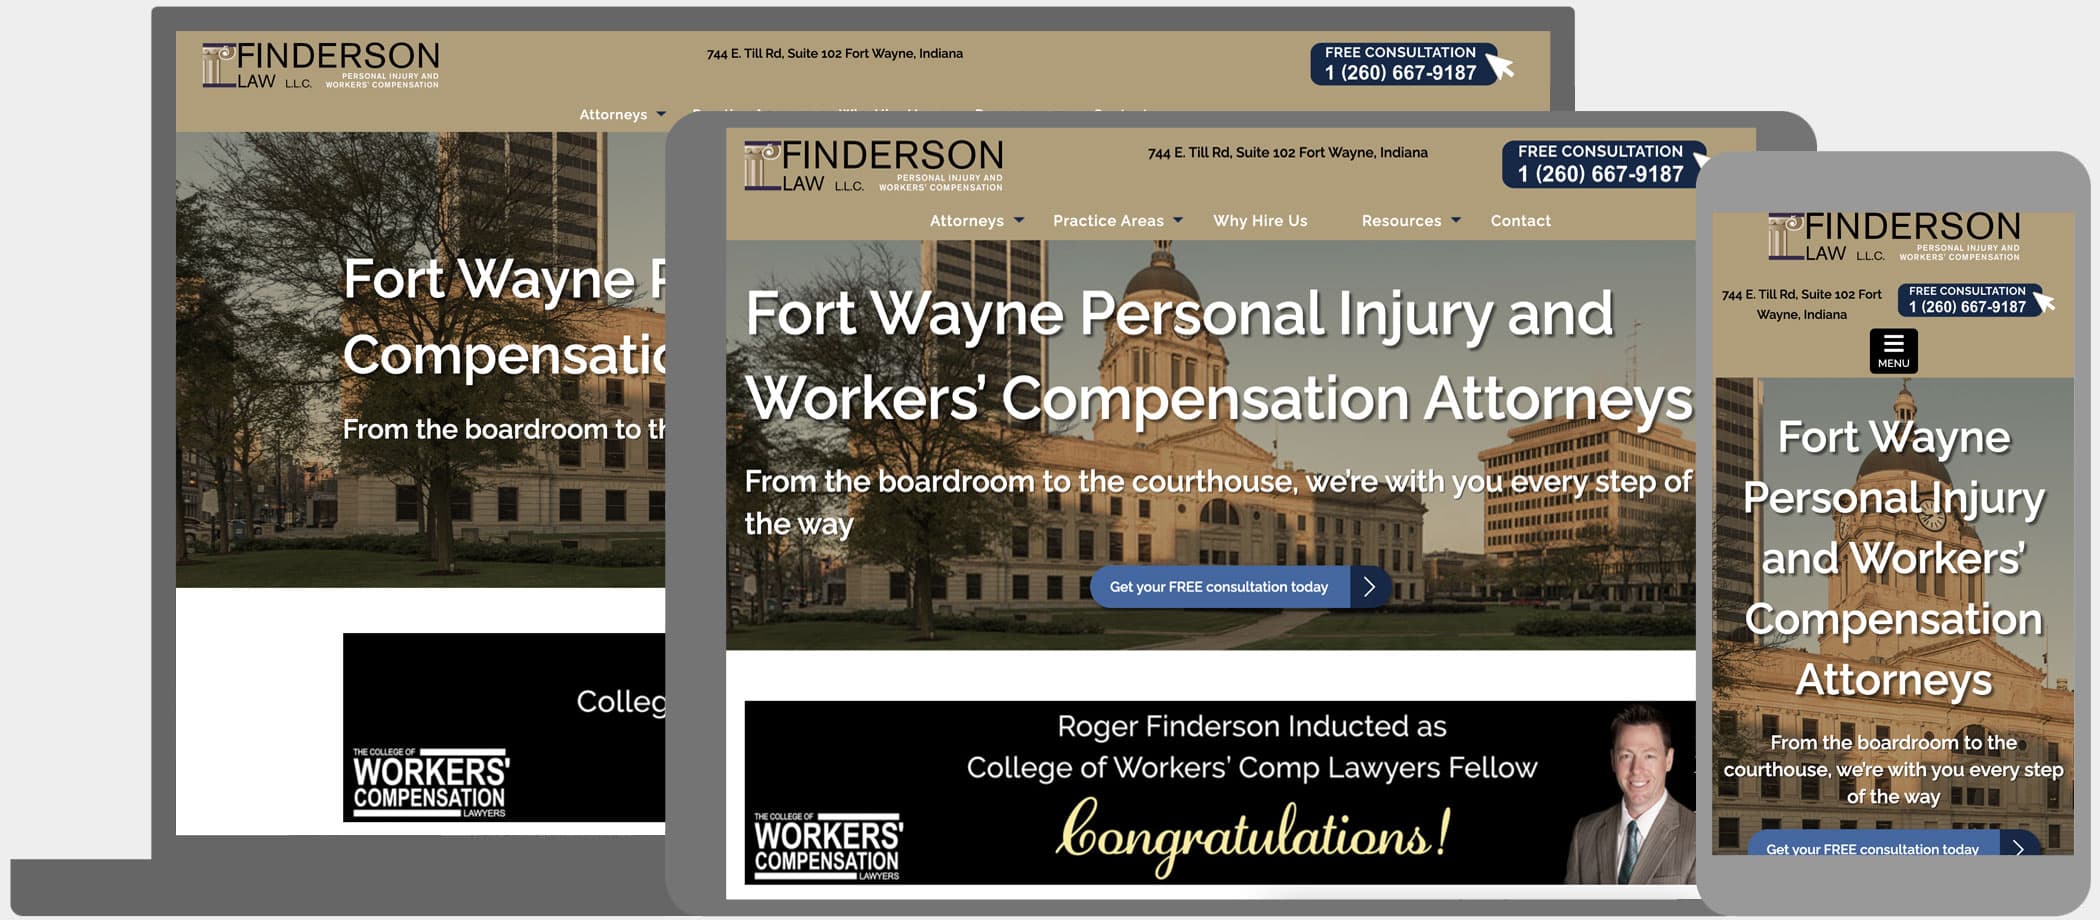 Finderson Law: Workers' comp attorney web design: customer focused content and design that increase leads and revenue.